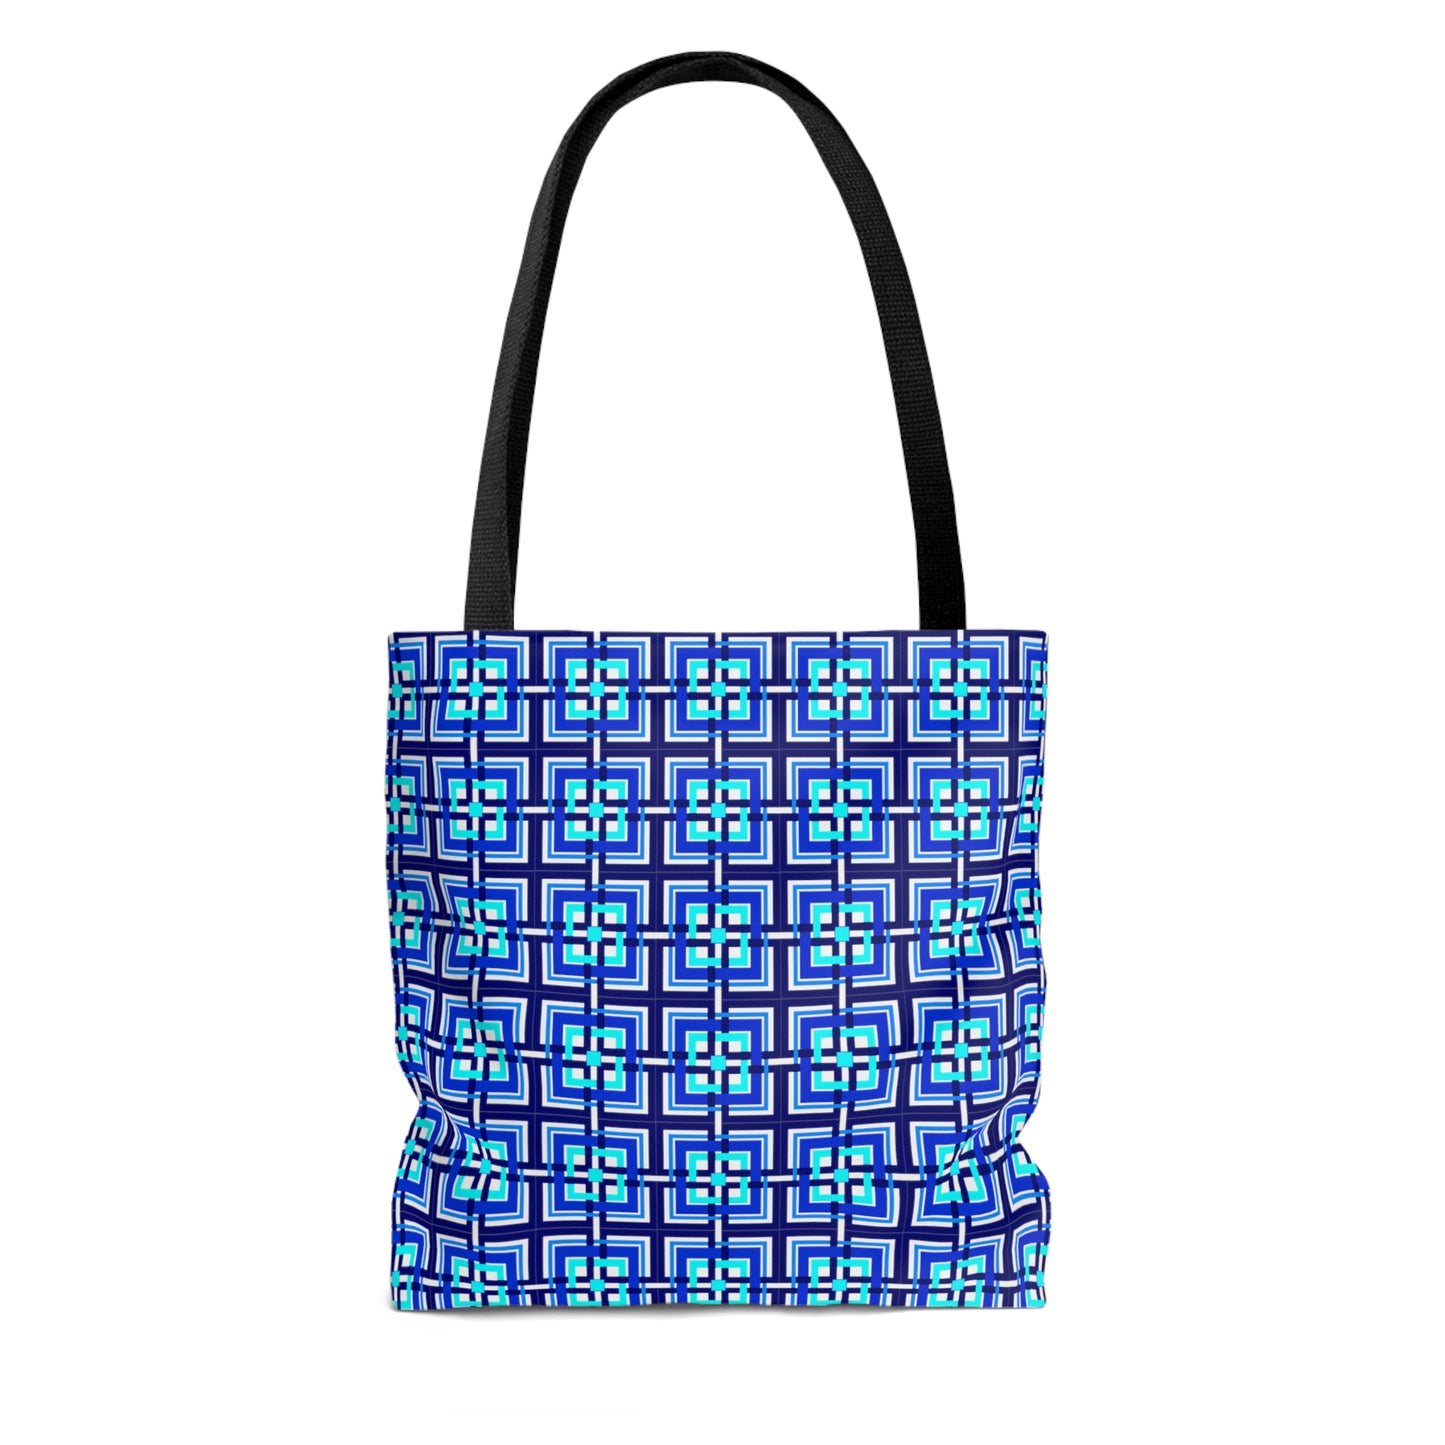 Small Intersecting Squares - Blue - White ffffff - Tote Bag